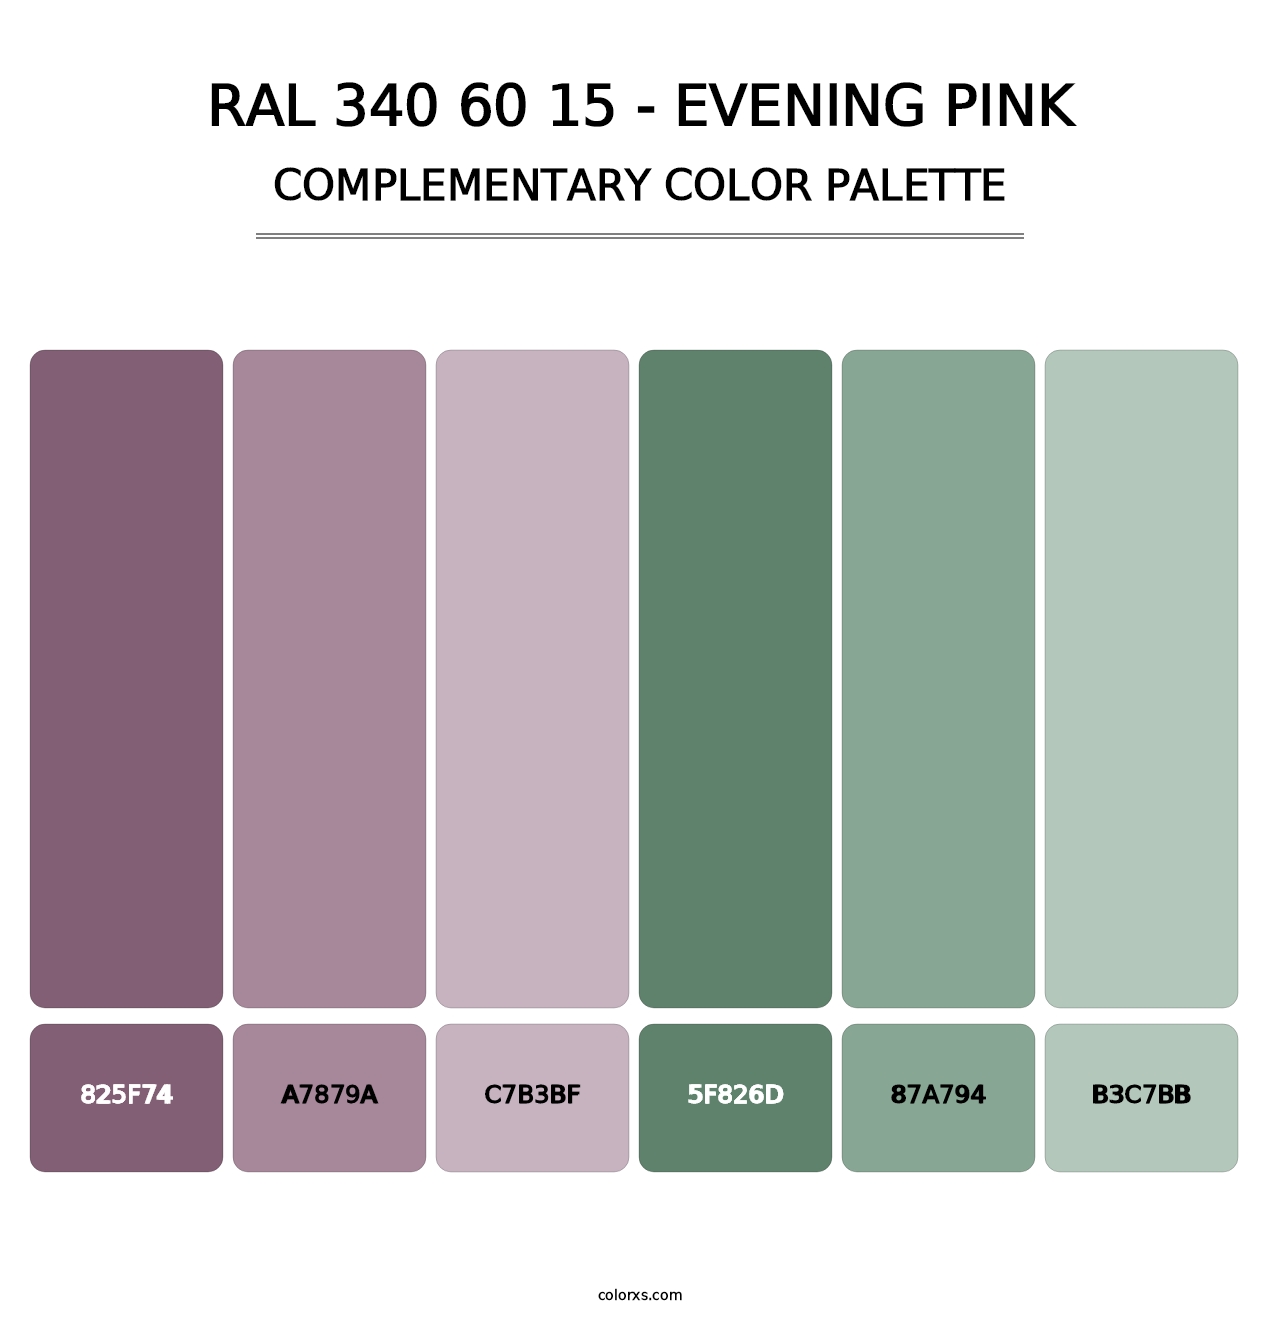 RAL 340 60 15 - Evening Pink - Complementary Color Palette